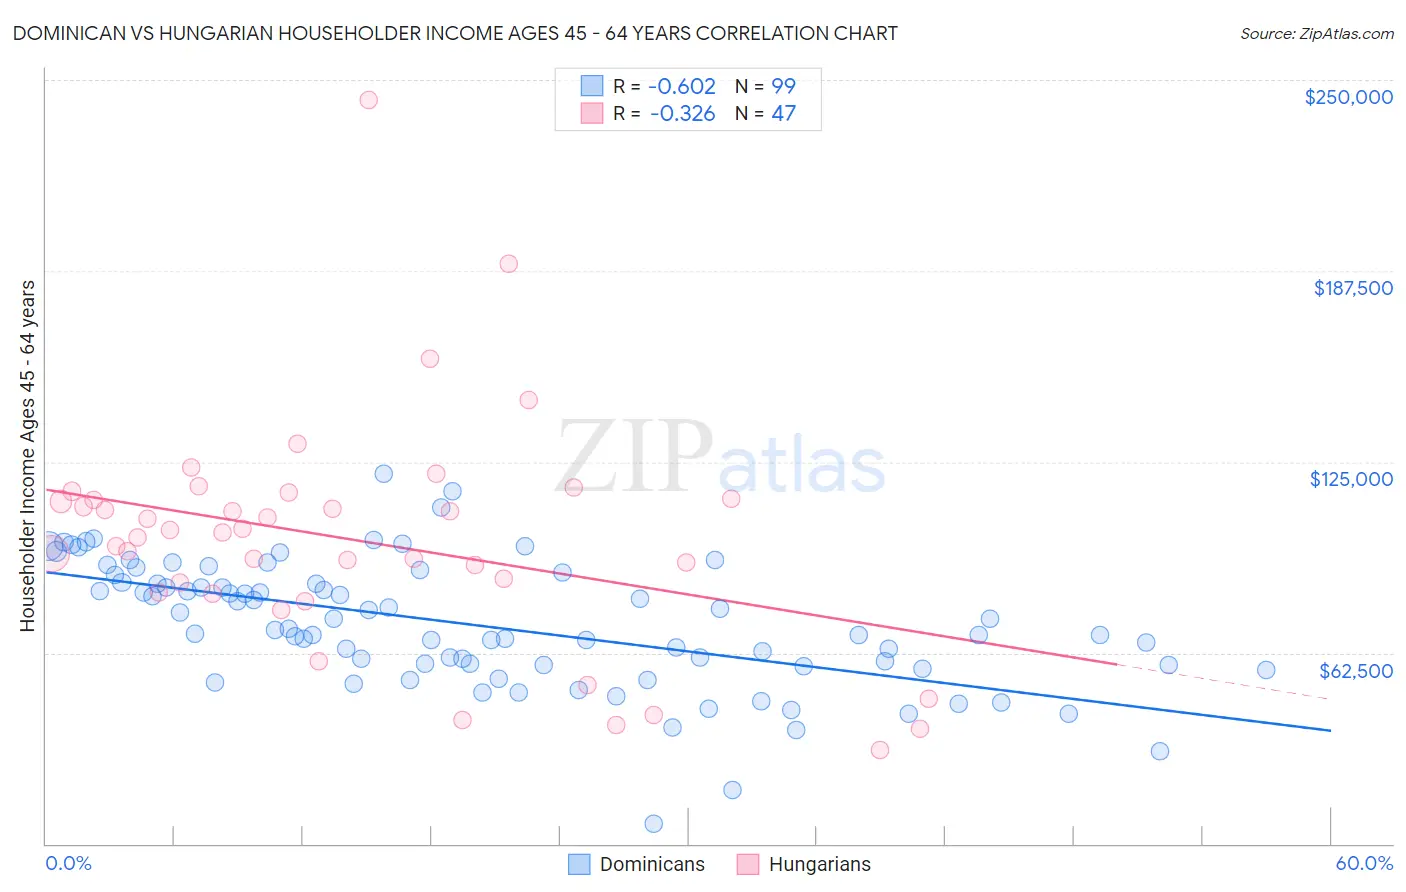 Dominican vs Hungarian Householder Income Ages 45 - 64 years